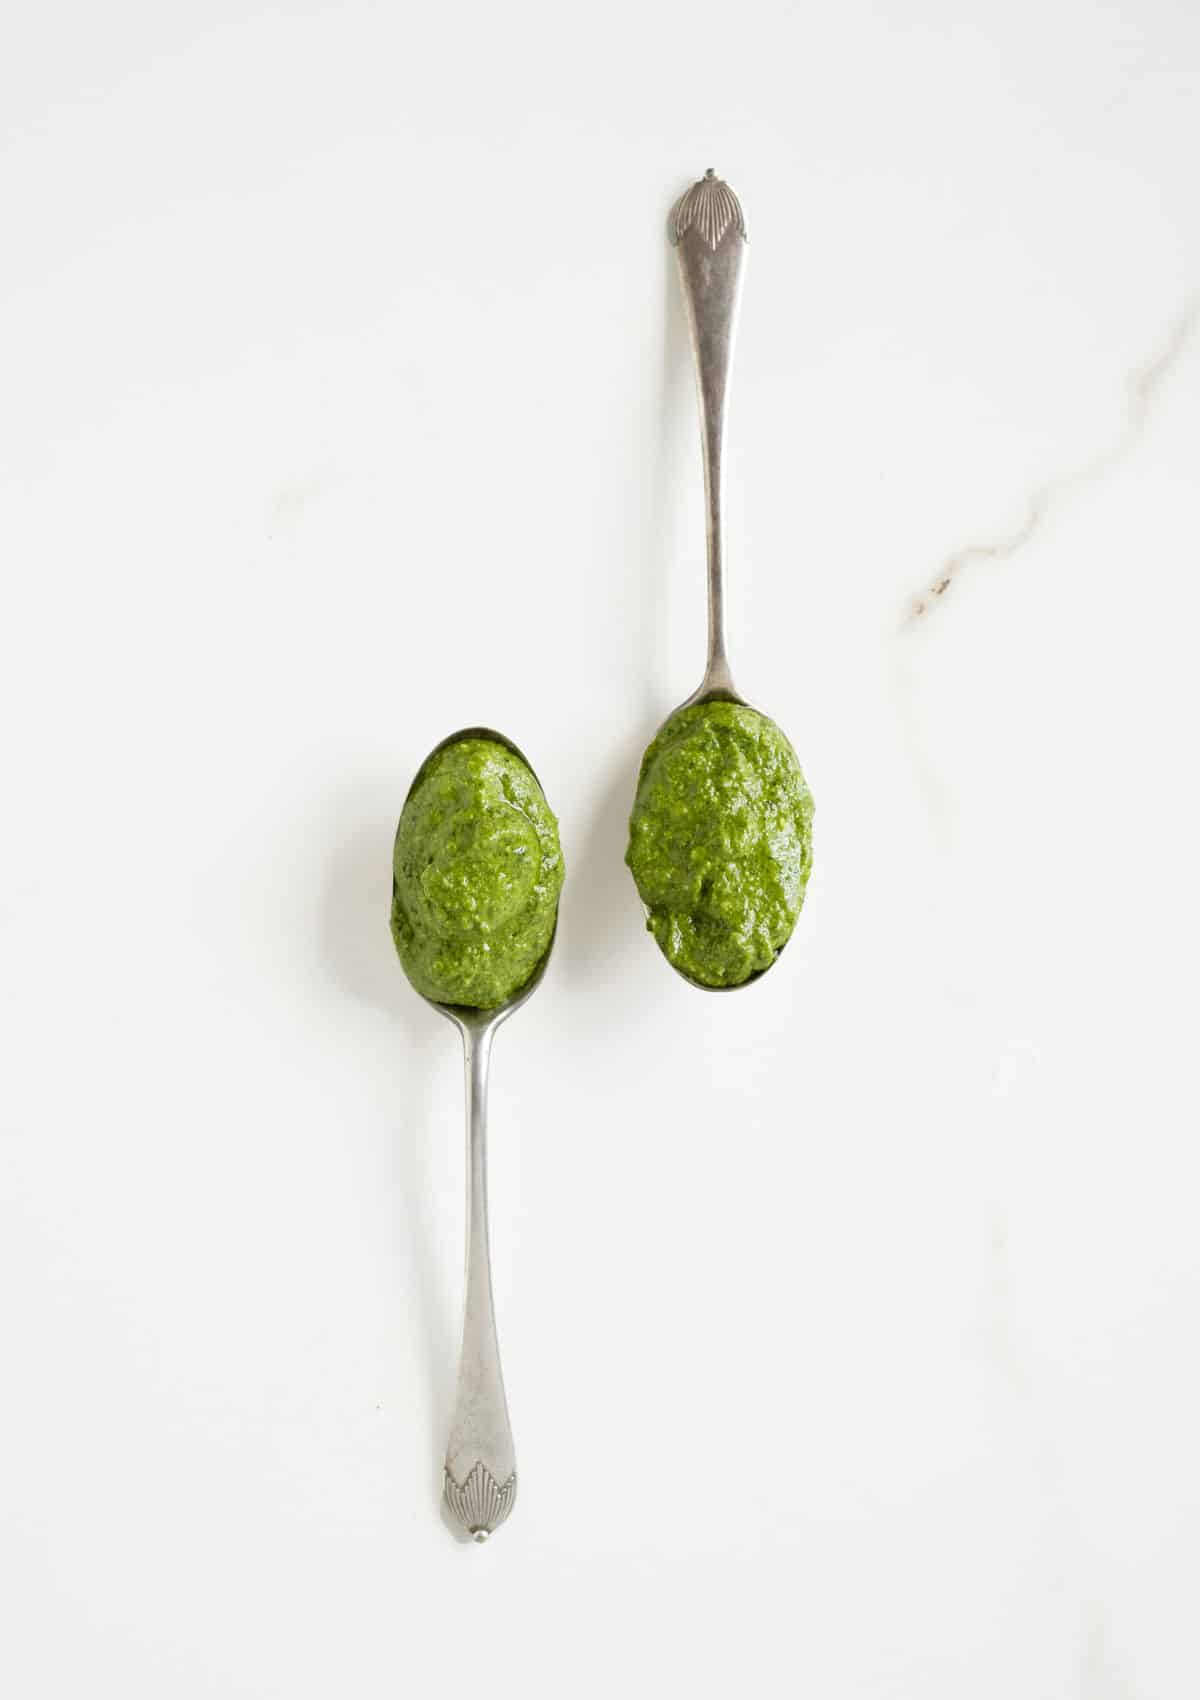 Two vintage spoons with spinach pesto on a white marble surface.